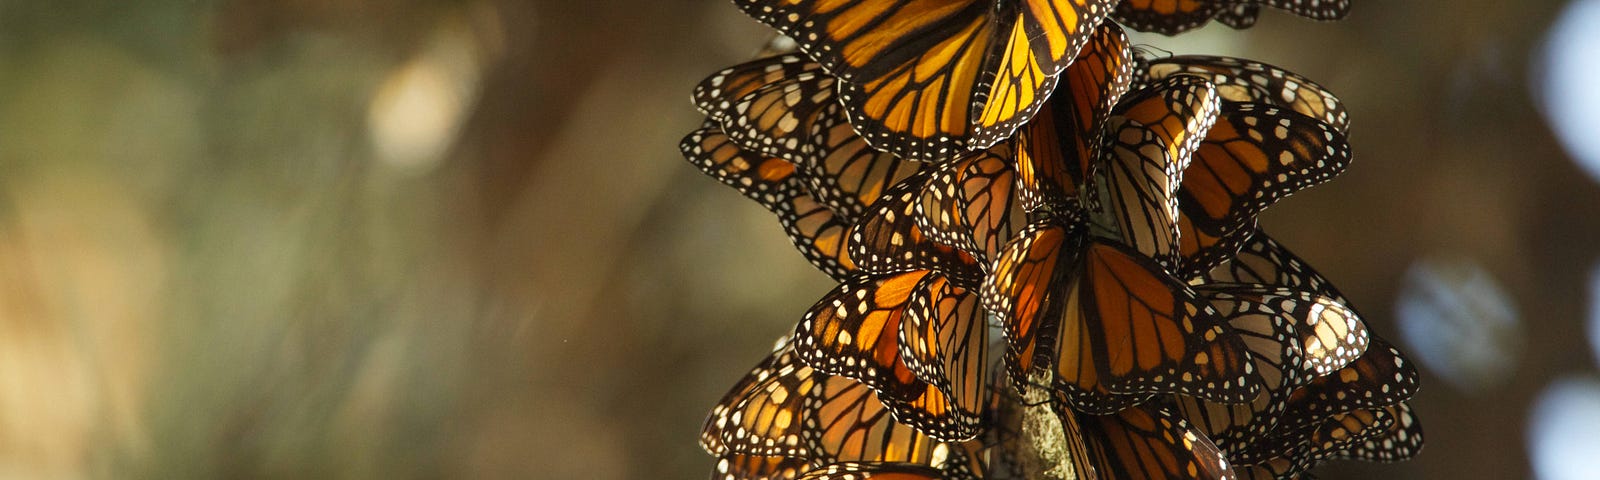 Monarch butterfly population overwintering in Pismo Beach, California by Ryan Hagerty, USFWS.